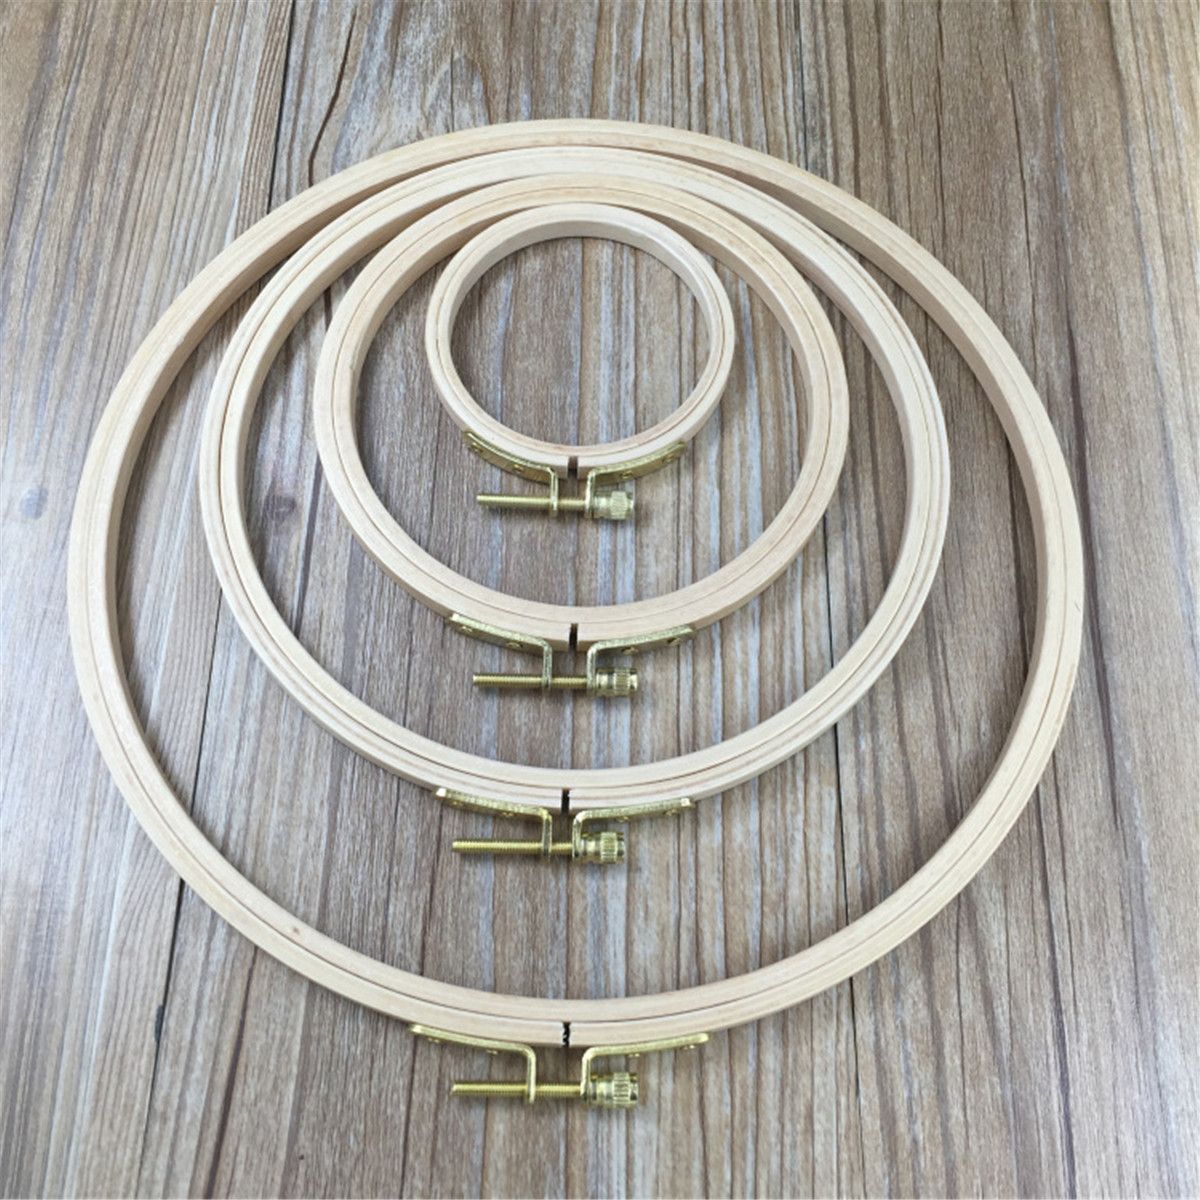 7-Size-Wooden-Embroidery-Hoops-Cross-Stitch-Sewing-Tools-Craft-Ring-Frame-Machine-Tool-1332370